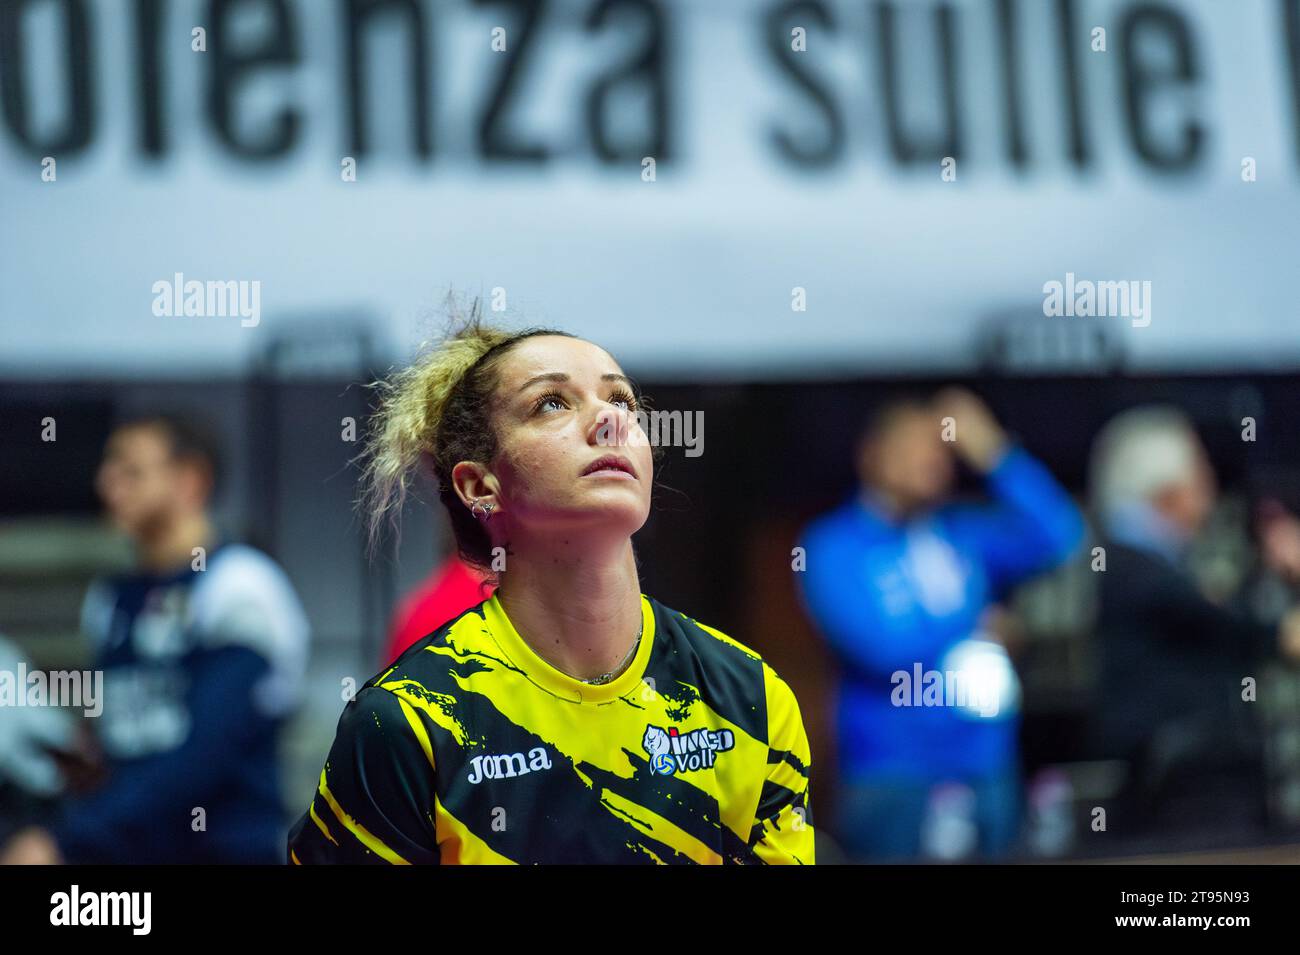 Treviso, Italy. 22nd Nov, 2023. Monica De Gennaro of Prosecco Doc Imoco Conegliano seen warming up before the LVF Serie A1 2023/24 volleyball match between Prosecco Doc Imoco Conegliano and Roma Volley Club at Palaverde stadium. Final score; Prosecco Doc Imoco Conegliano 3:0 Roma Volley Club. (Photo by Alberto Gardin/SOPA Images/Sipa USA) Credit: Sipa USA/Alamy Live News Stock Photo